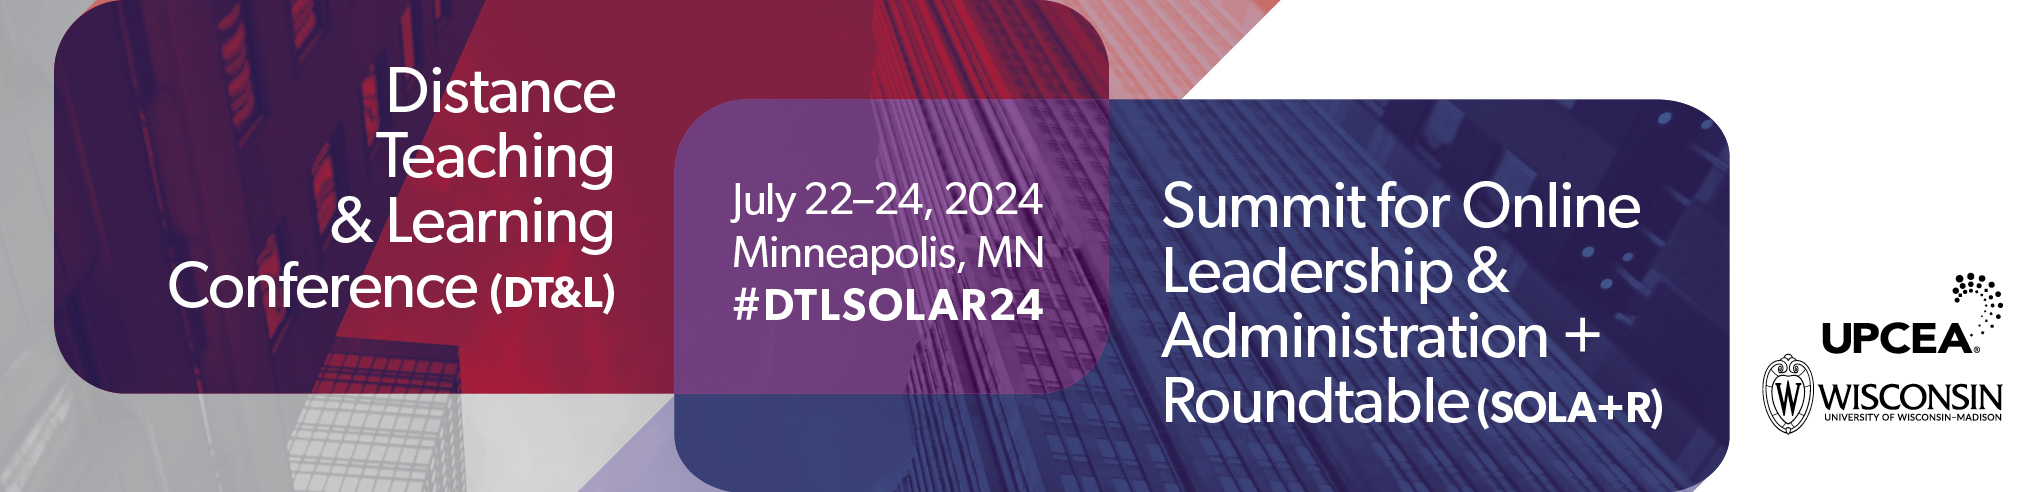 2024 Distance Teaching & Learning (DT&L) and Summit for Online Leadership and Administration + Roundtable (SOLA+R) | July 22-24, 2024 | Minneapolis, MN